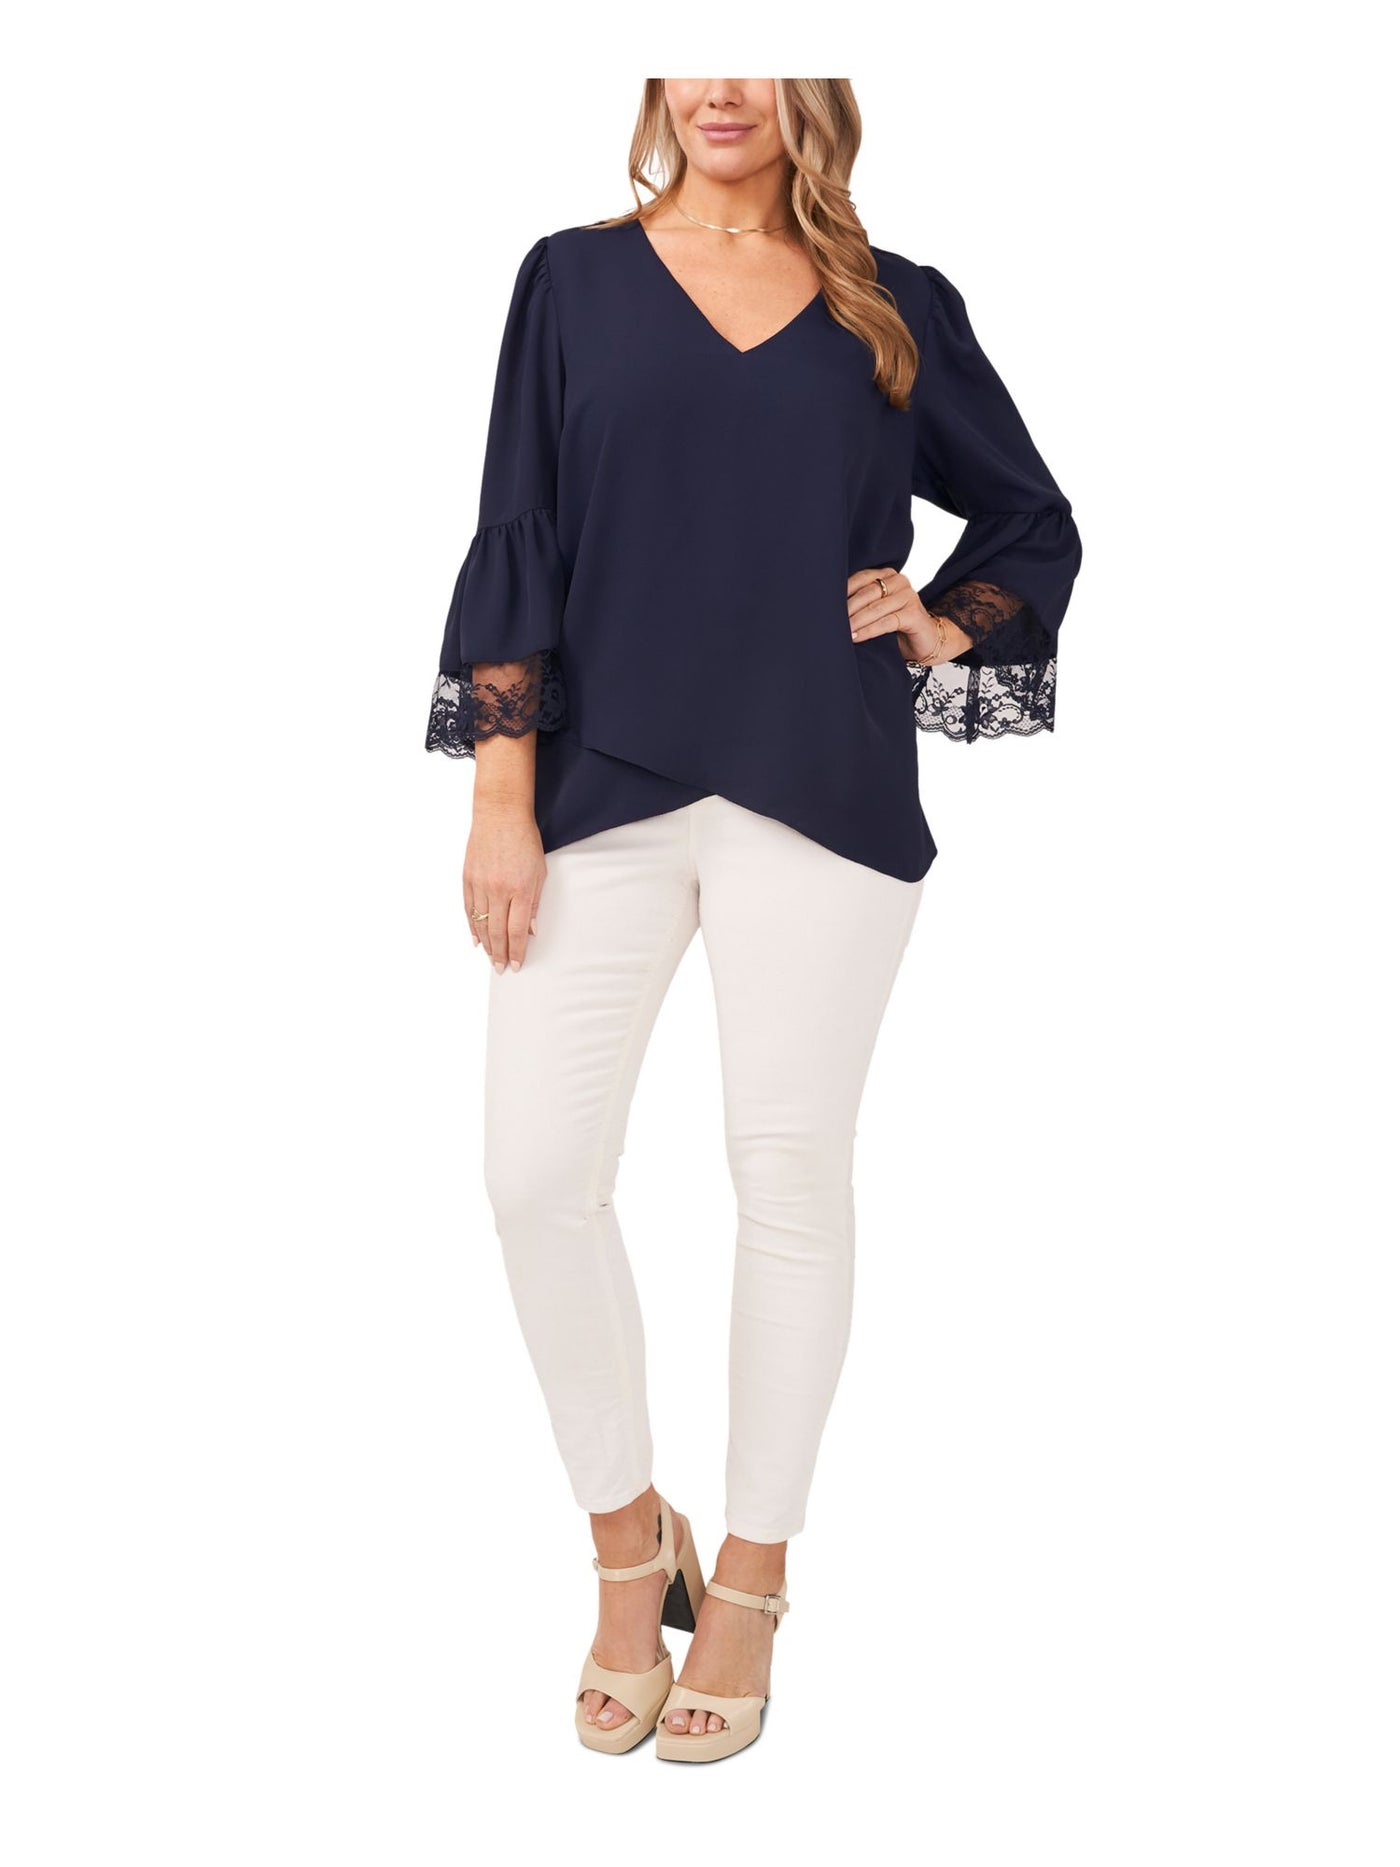 VINCE CAMUTO Womens Navy Lace Cross Front Hi-Lo Hem Bell Sleeve V Neck Wear To Work Top XS